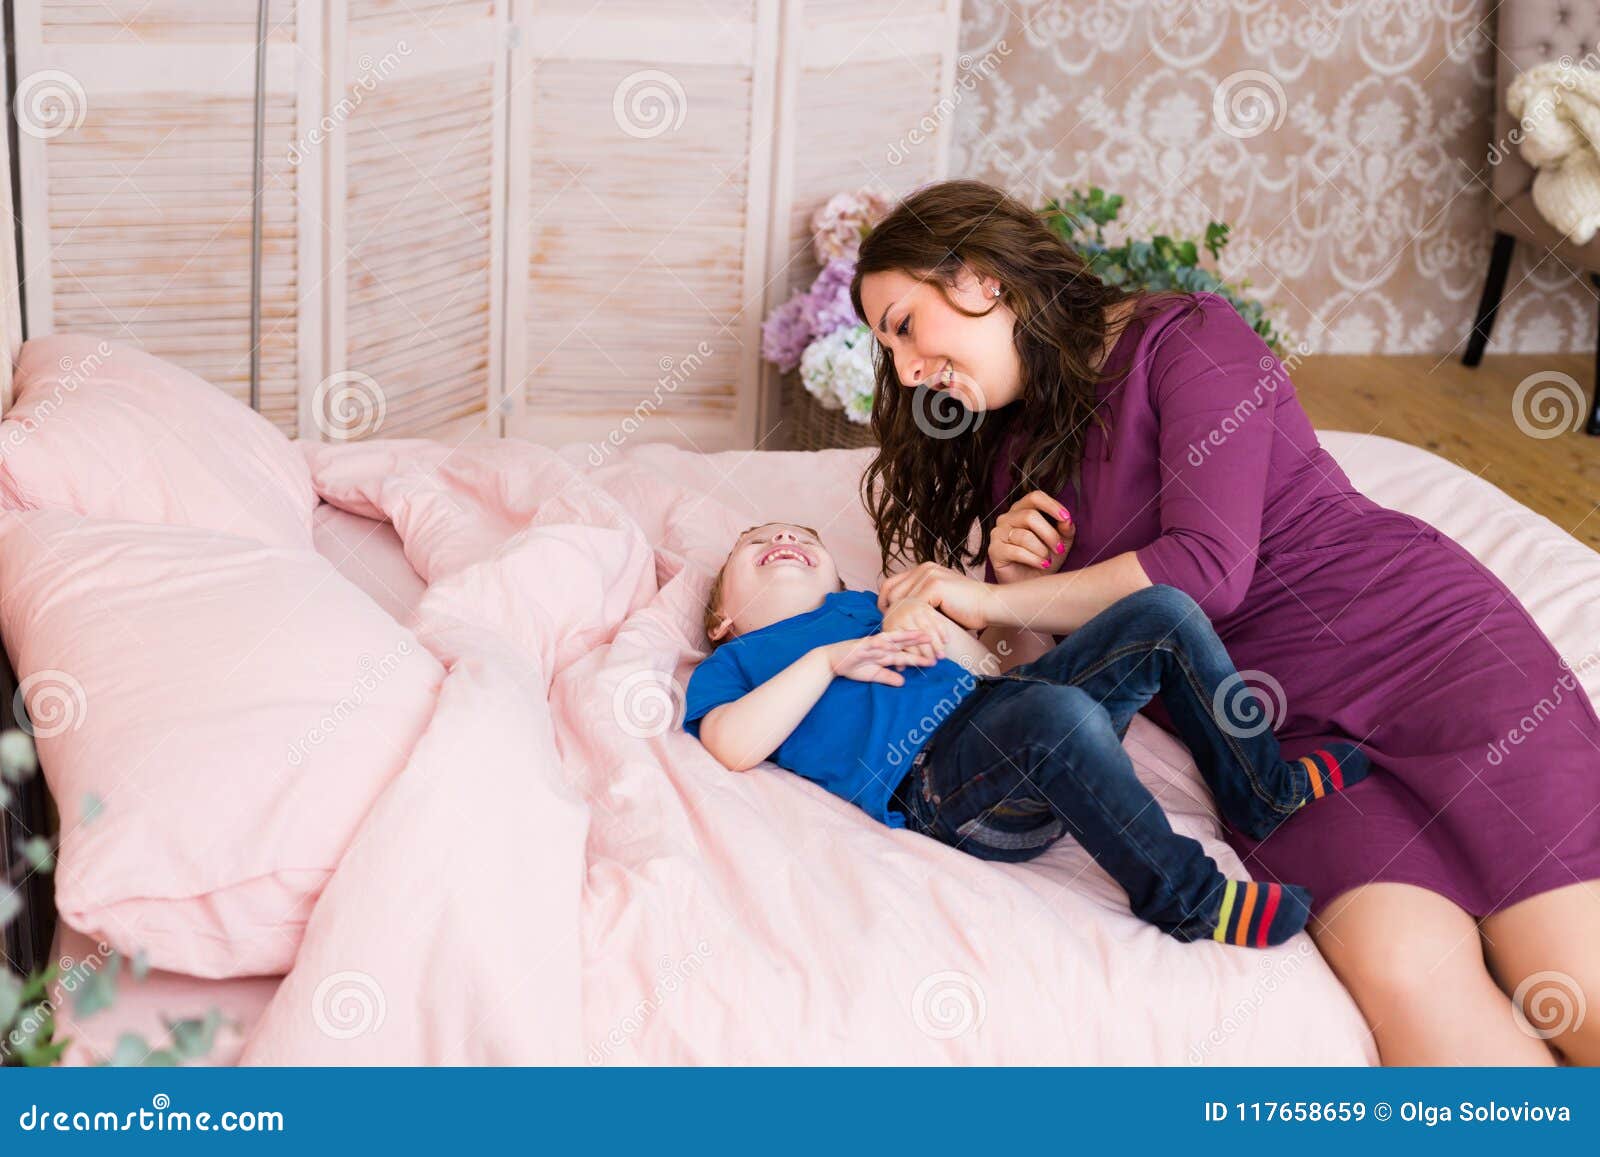 Little Boy Smiling And Playing With His Mom In The Bed Stock Image